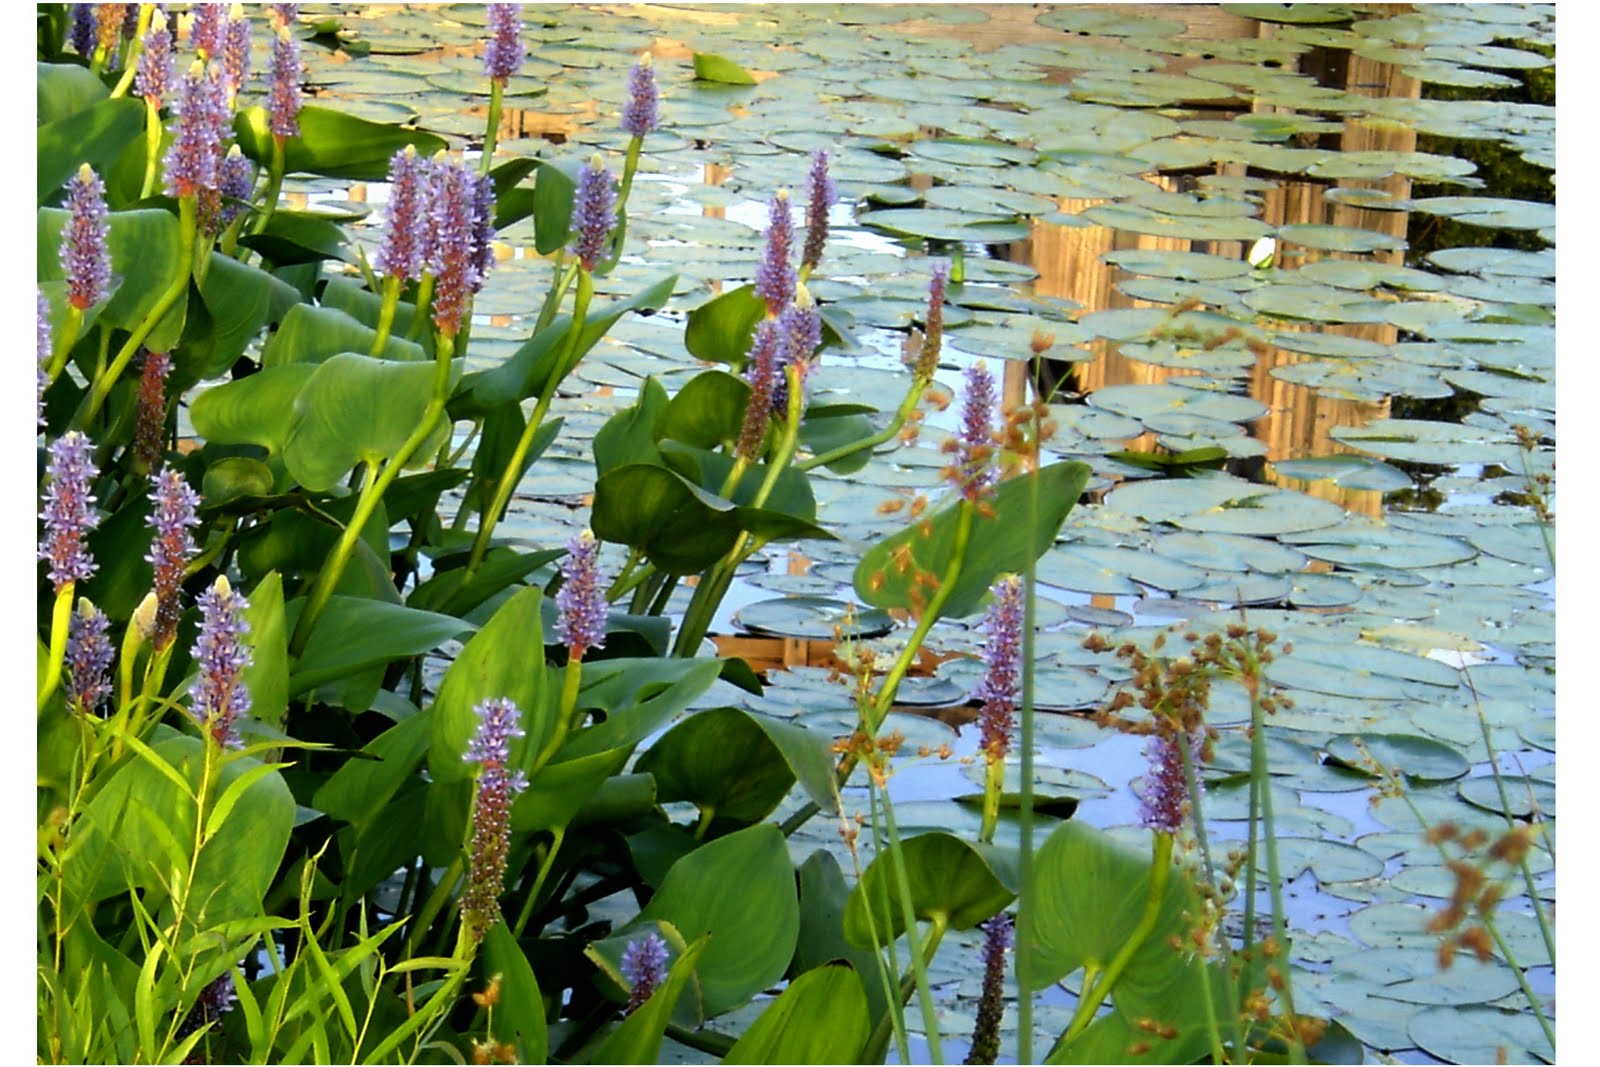 Pickerelweed emerging from water, displaying purple blooms and spade-shaped leaves